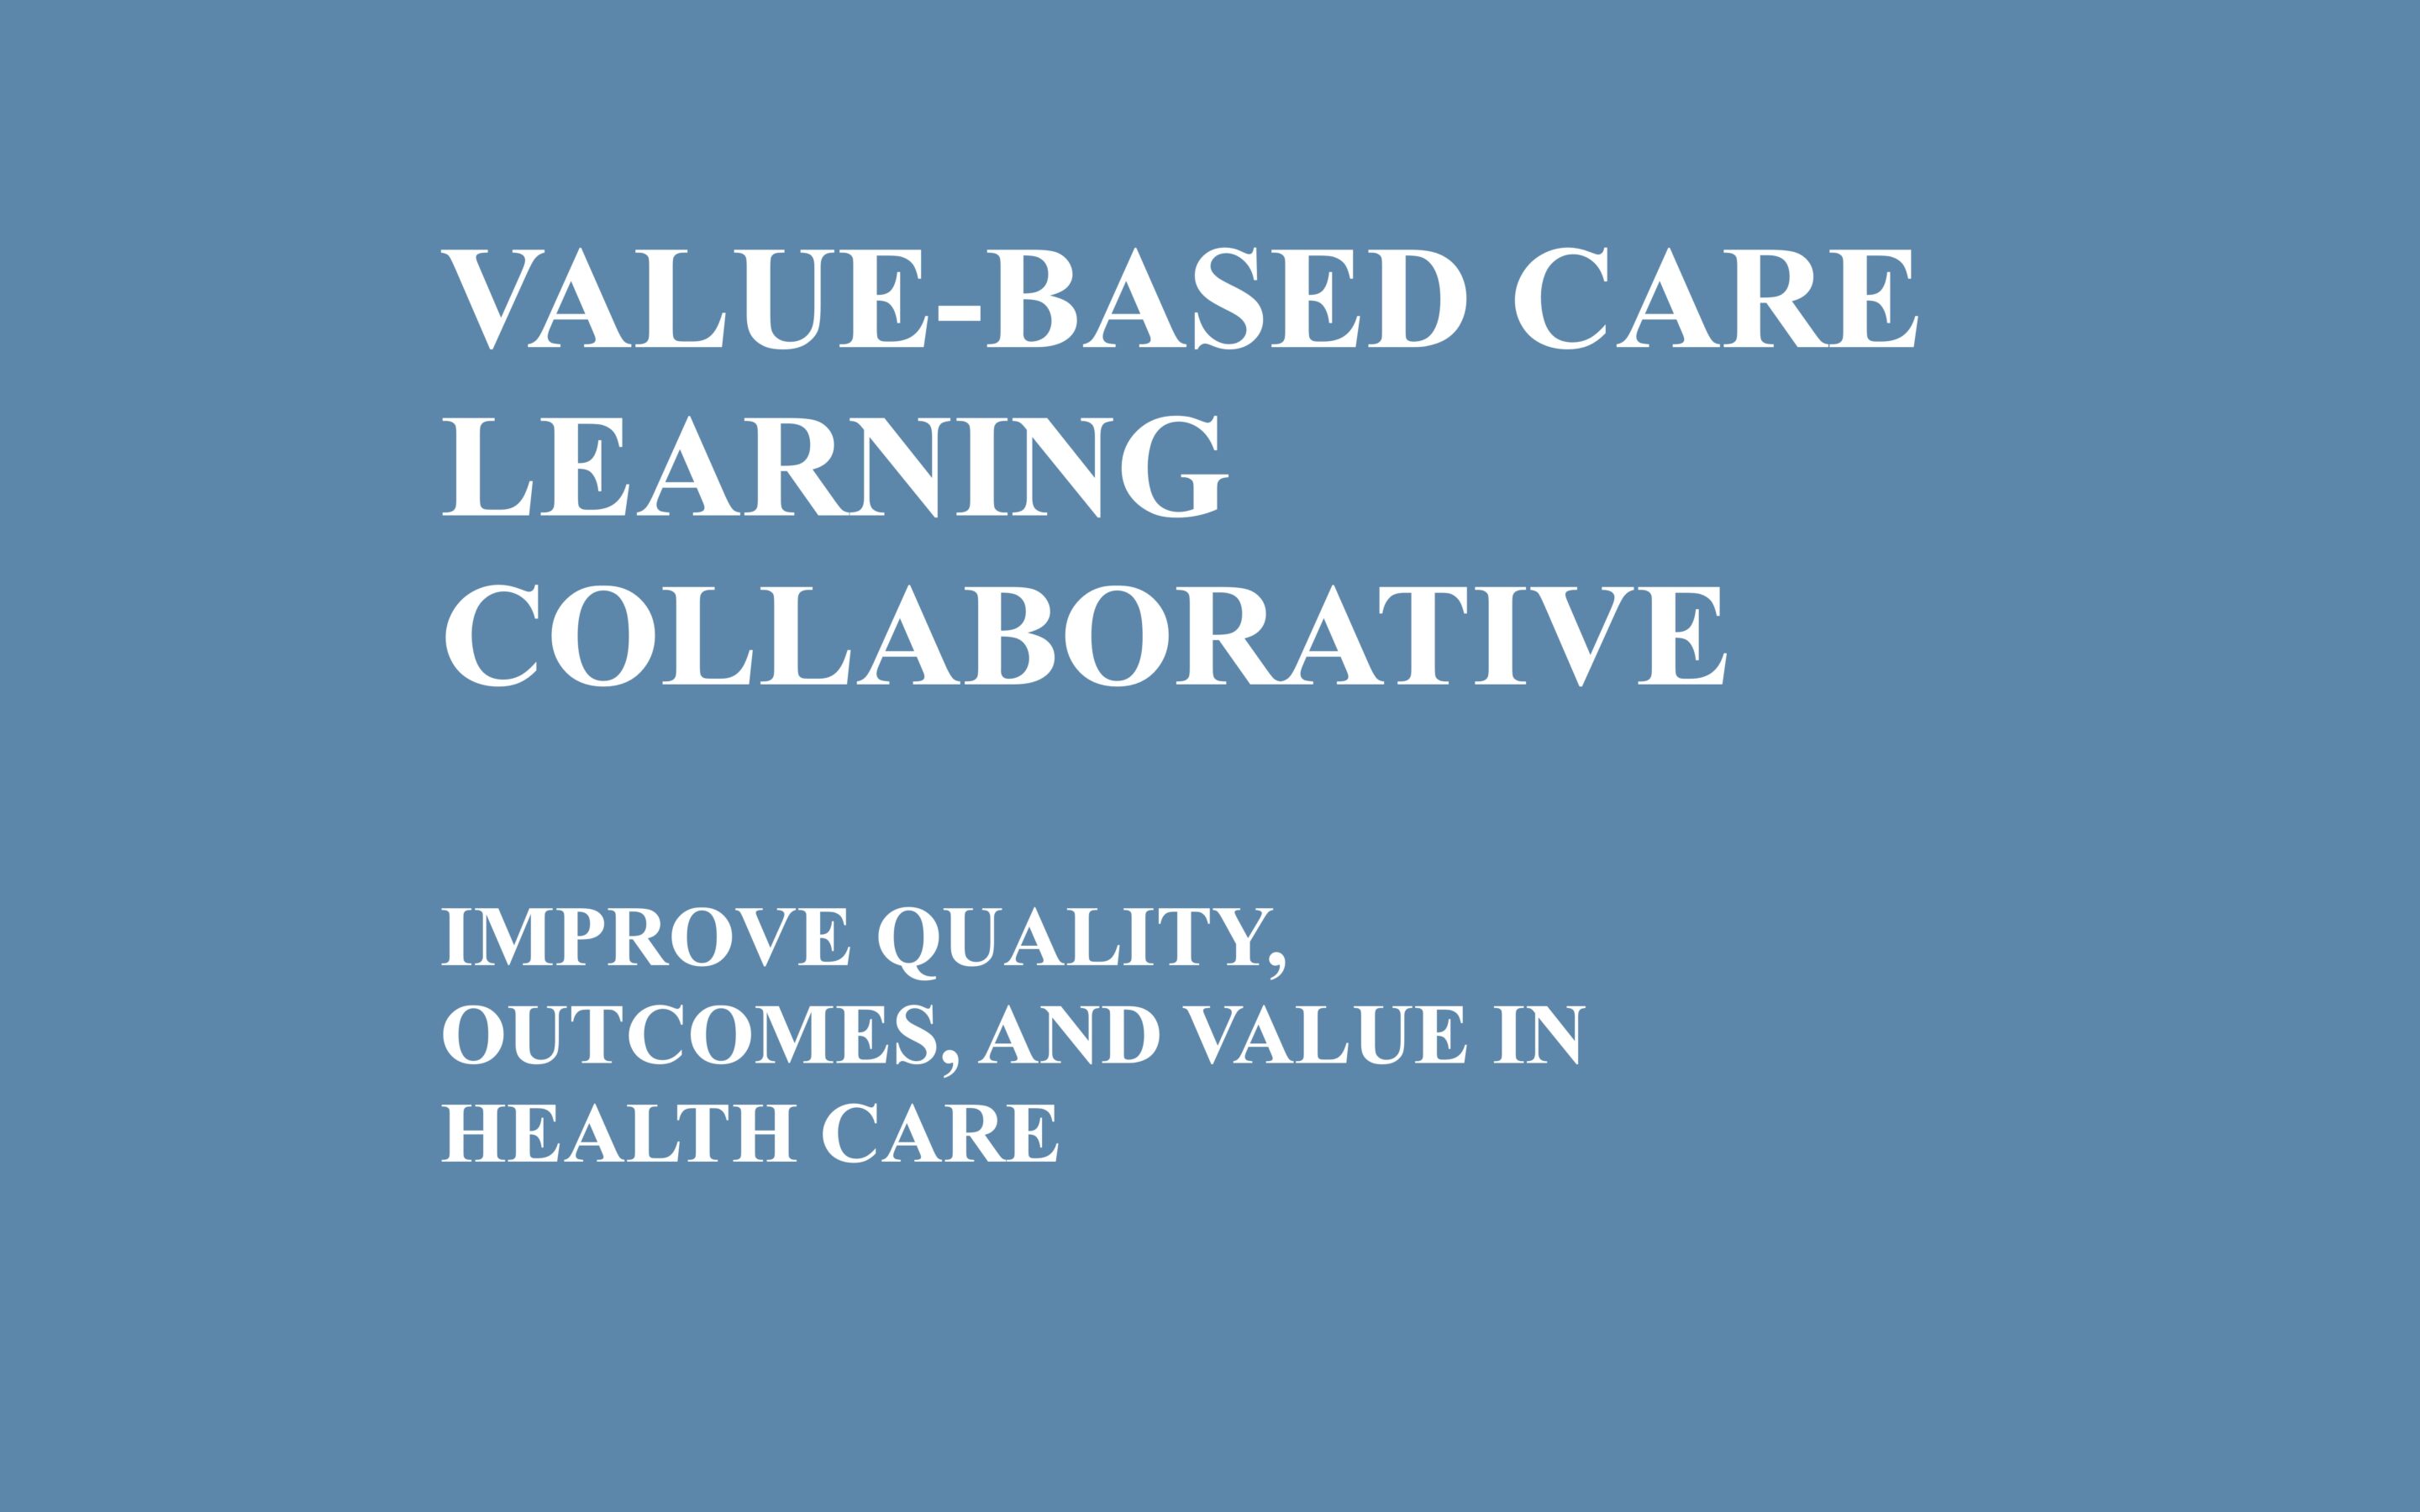 Introduction: Value-Based Care Learning Collaborative